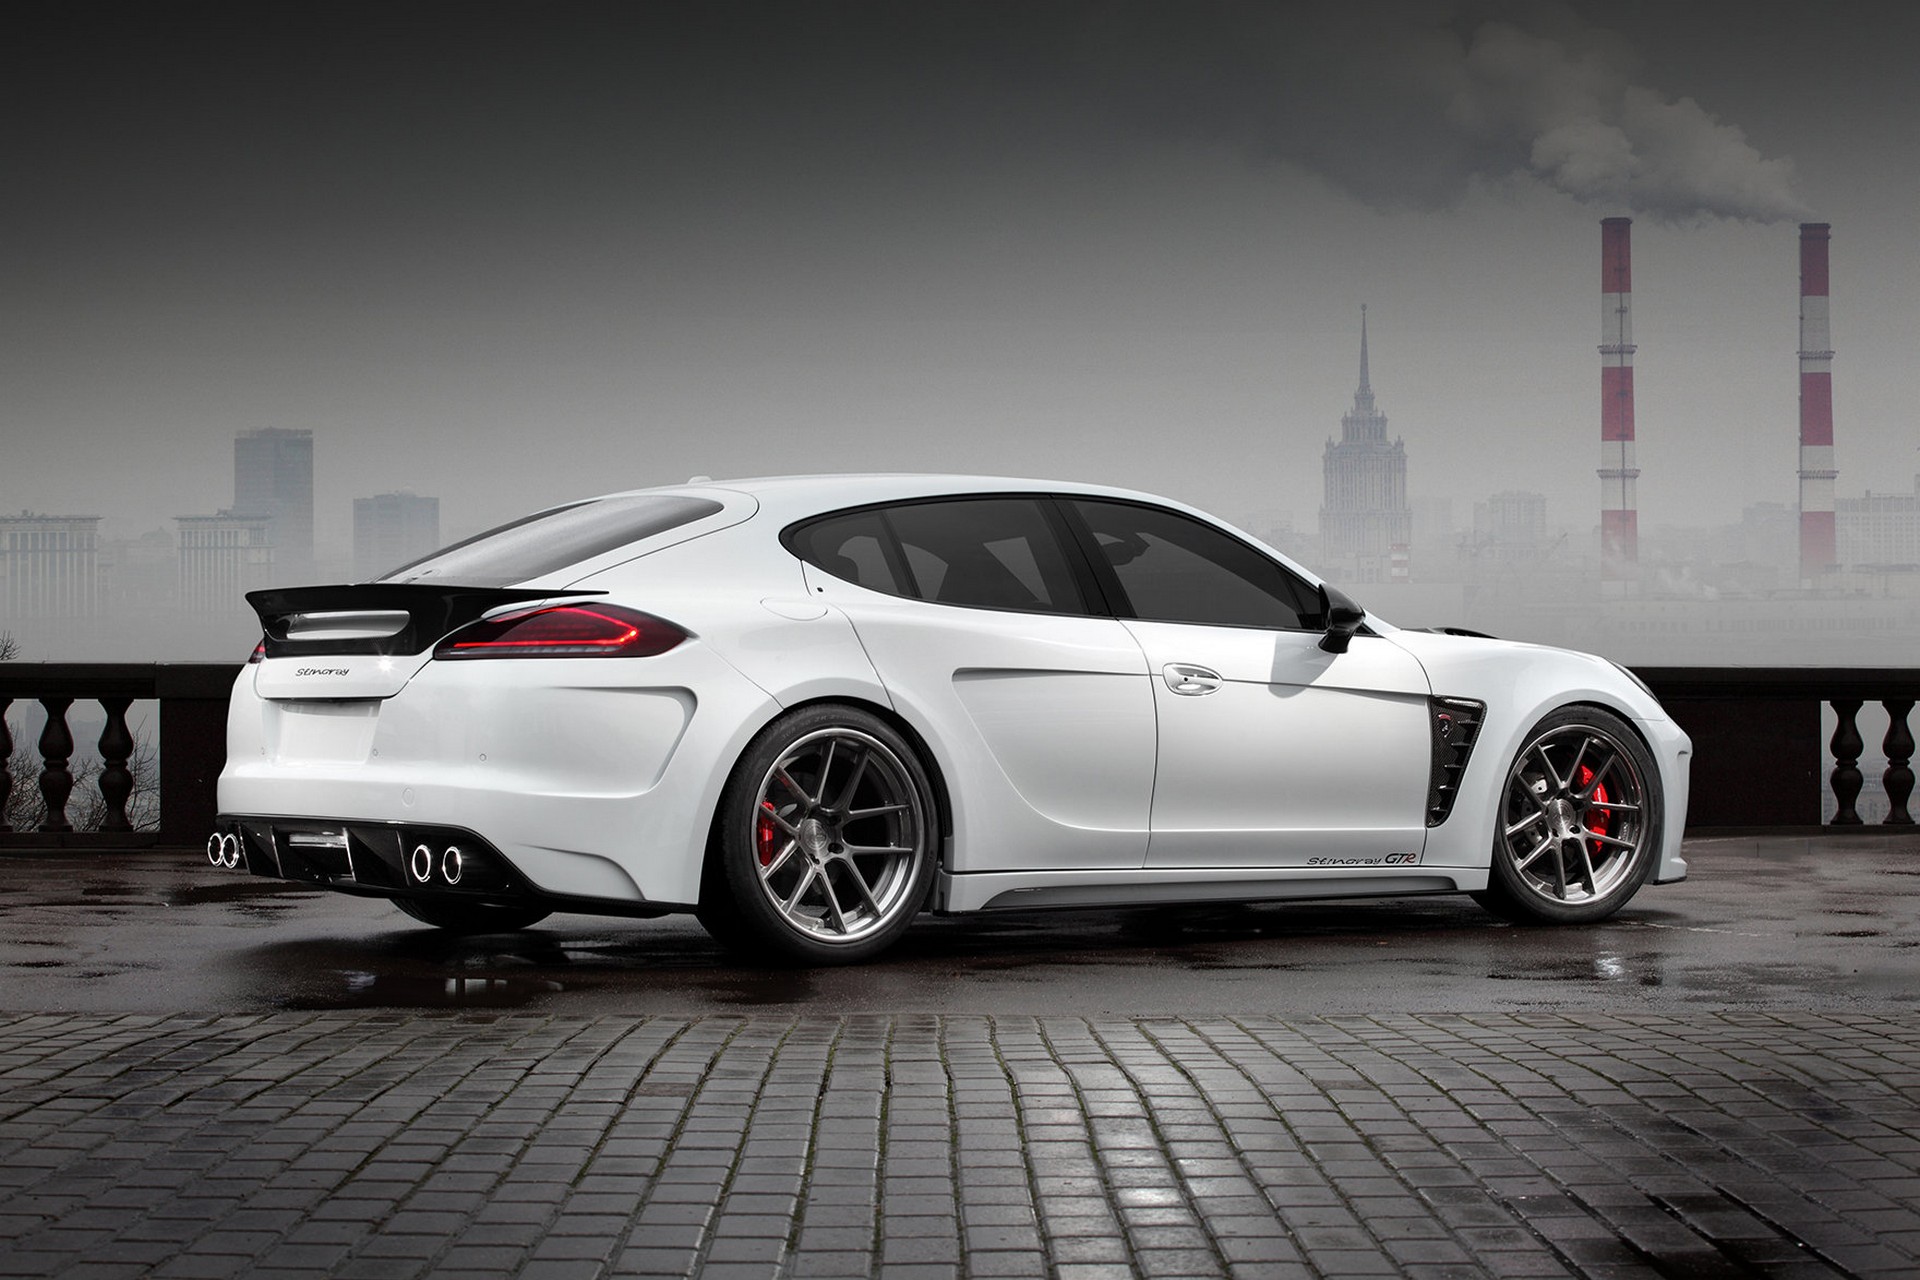 Check our price and buy Topcar Design body kit for Porsche Panamera GTR Edition